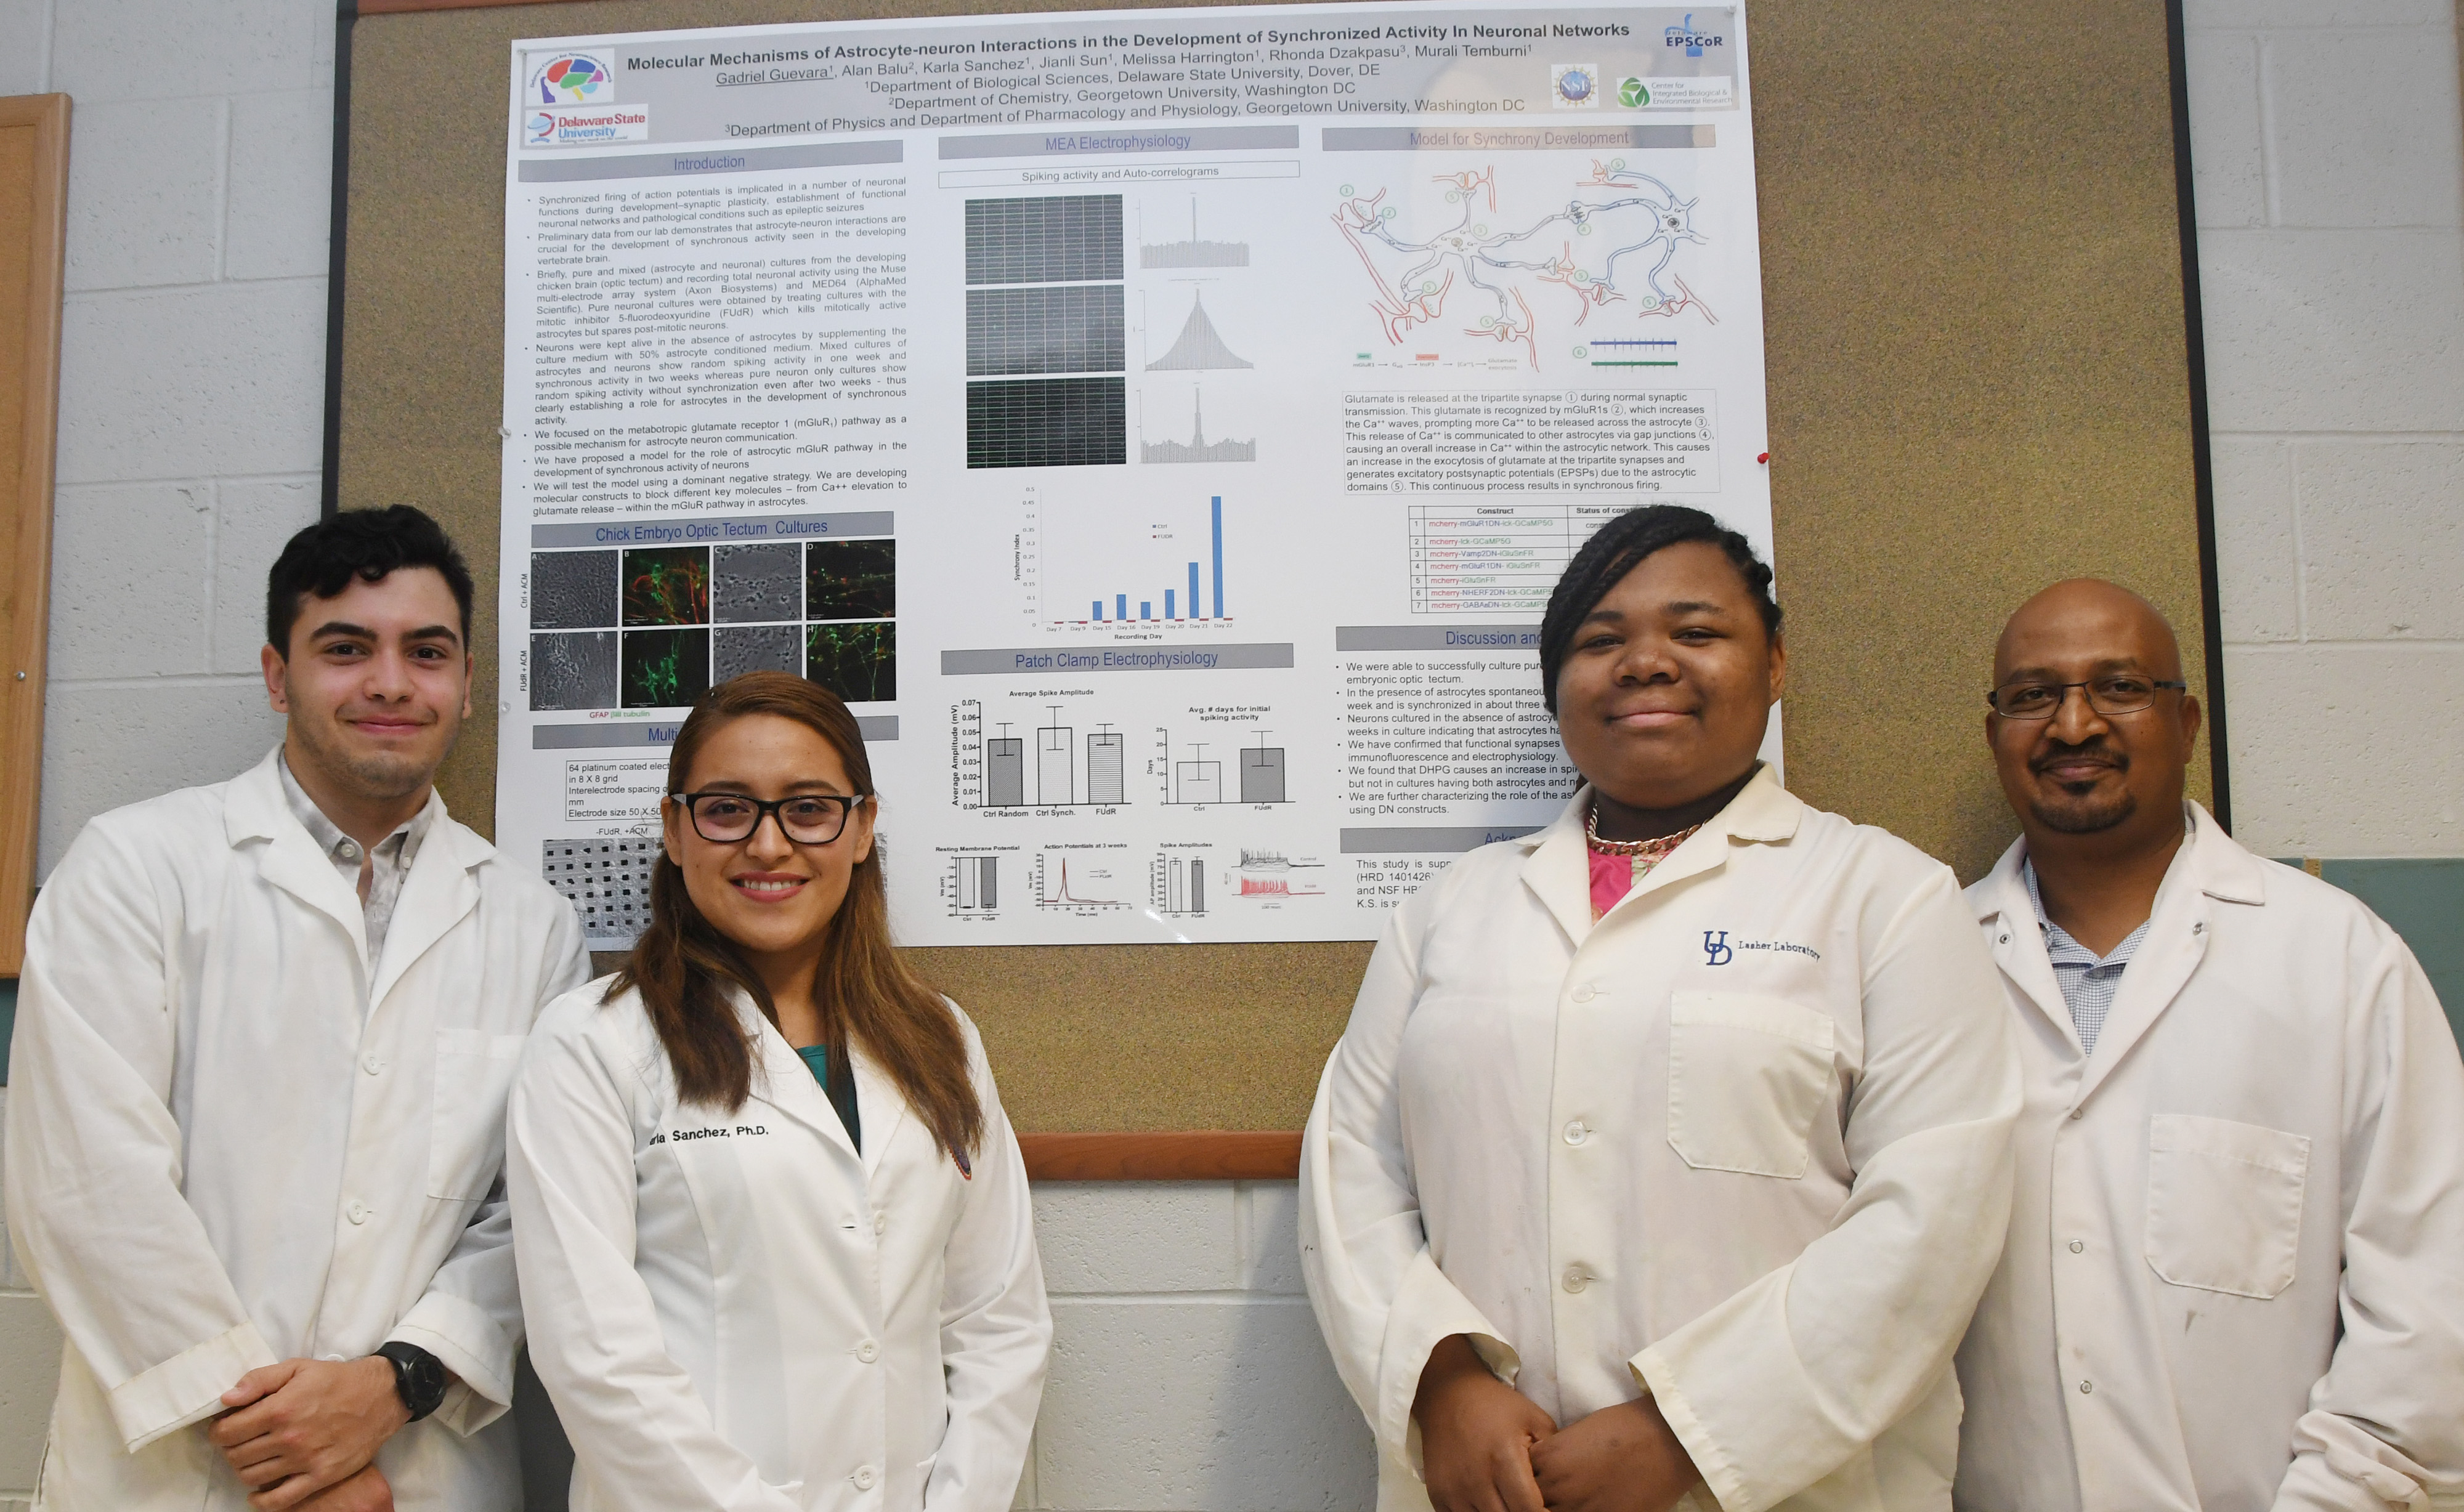 (L-r) Gadriel Guevara, Karla Sanchez, Destiny King and Dr. Murali Temburni stand in front of a poster that relates to their current neuroscience research being funded by the National Science Foundation.